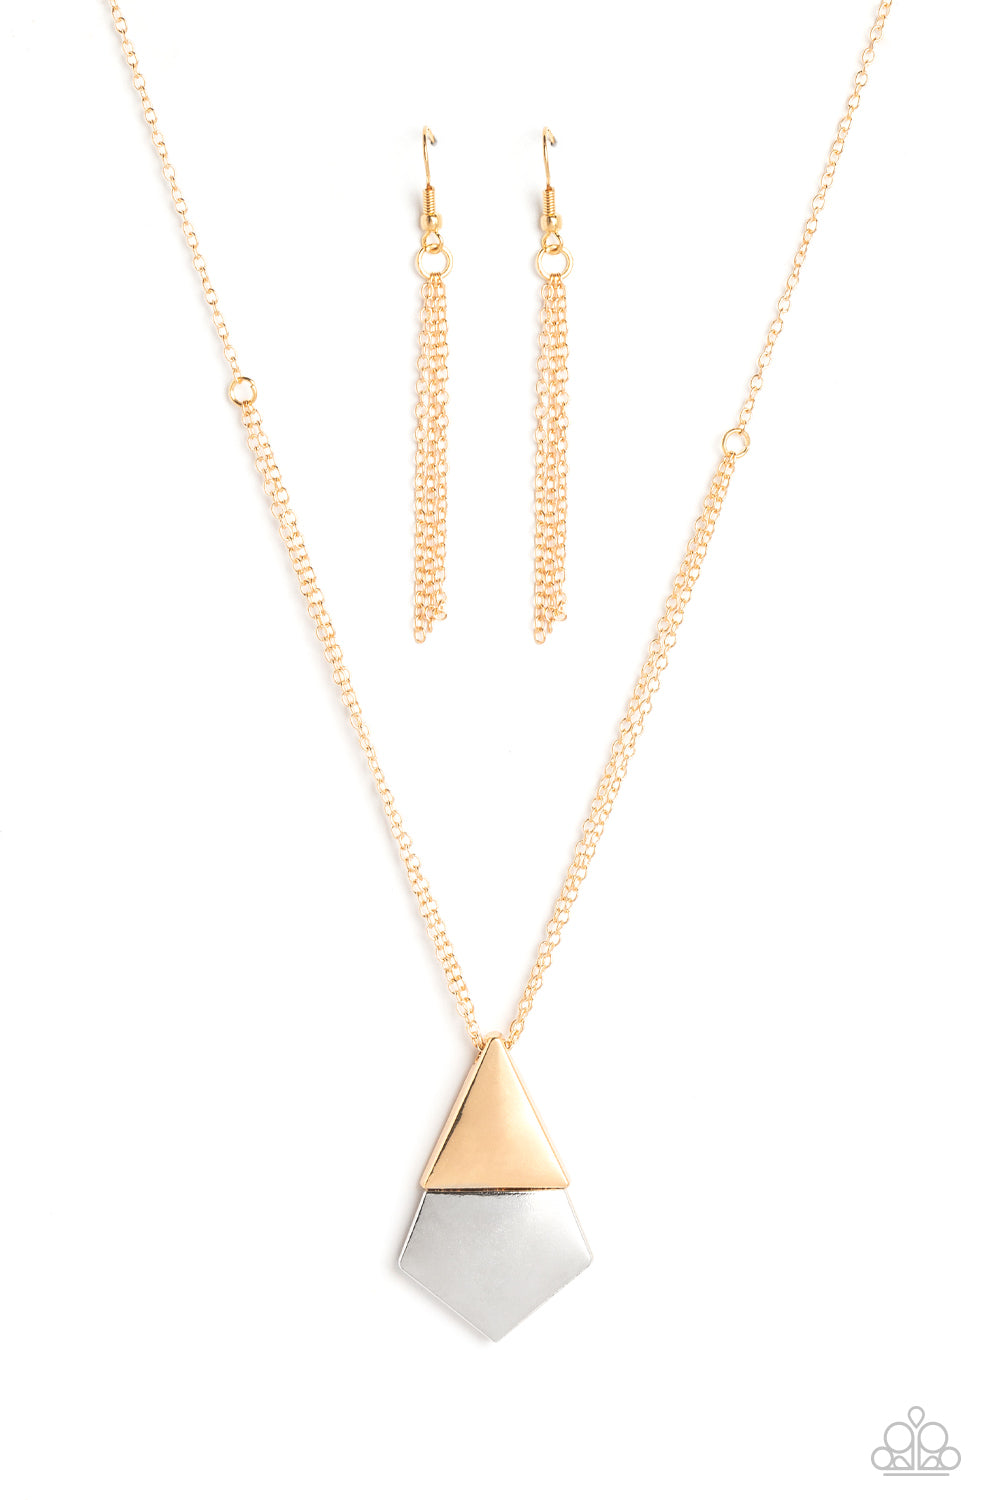 Brushed in an high-sheen finish, a gold triangle rests atop a shiny, silver pentagon, creating an upside-down, kite-shaped pendant. 